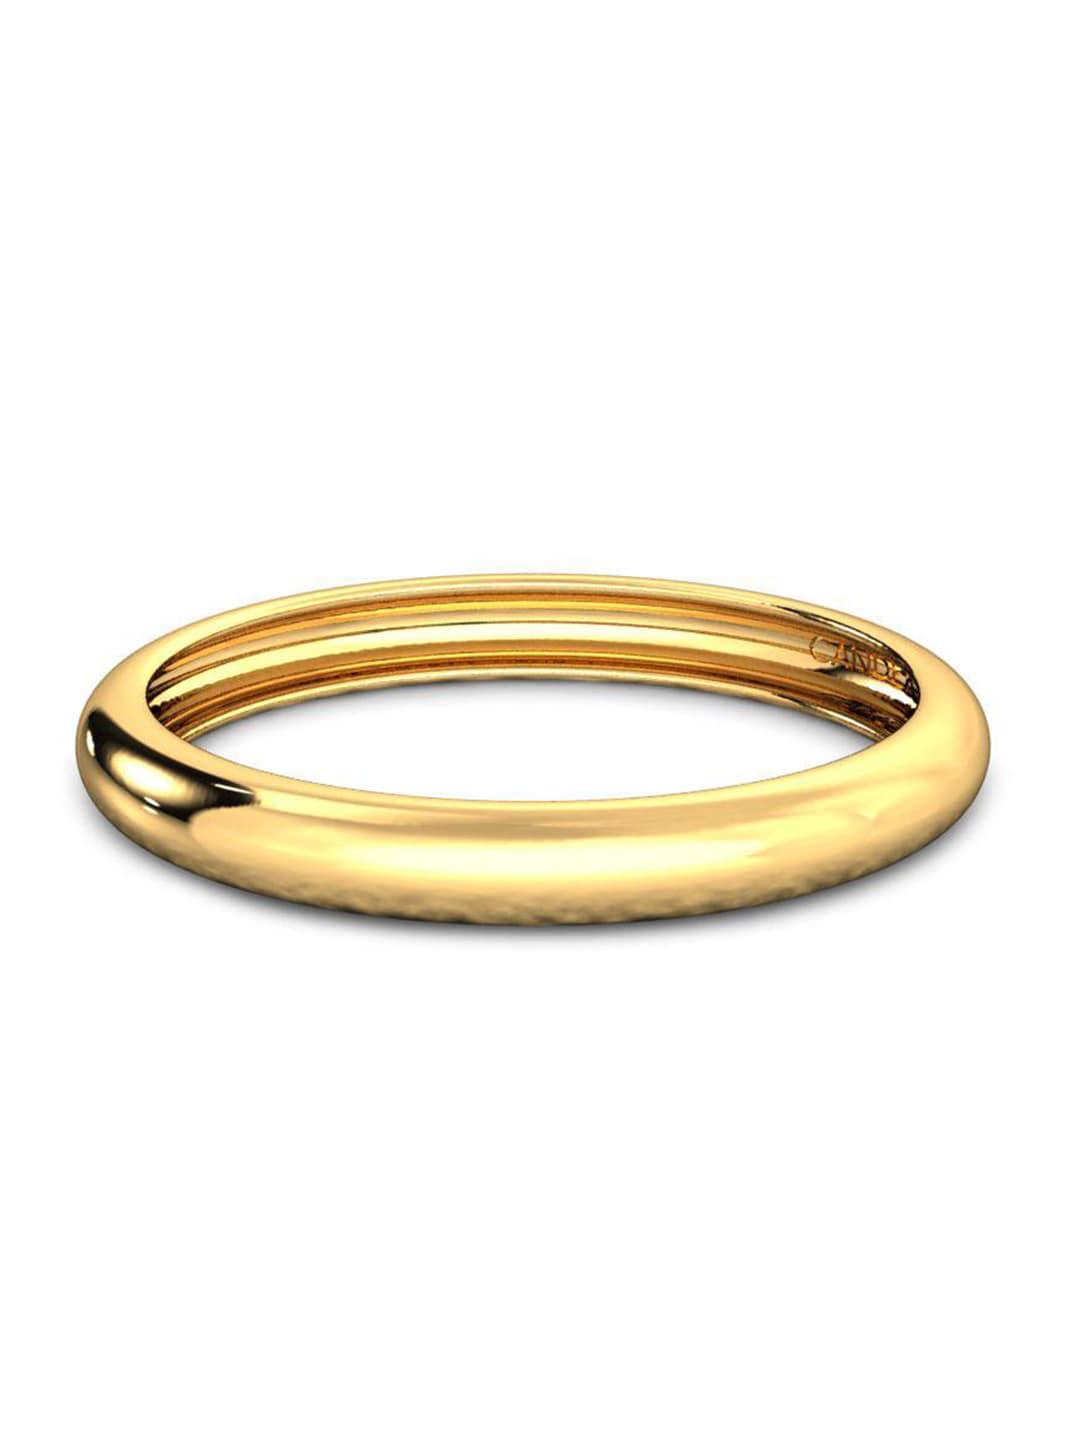 CANDERE A KALYAN JEWELLERS COMPANY 18KT Gold Ring-1.46gm